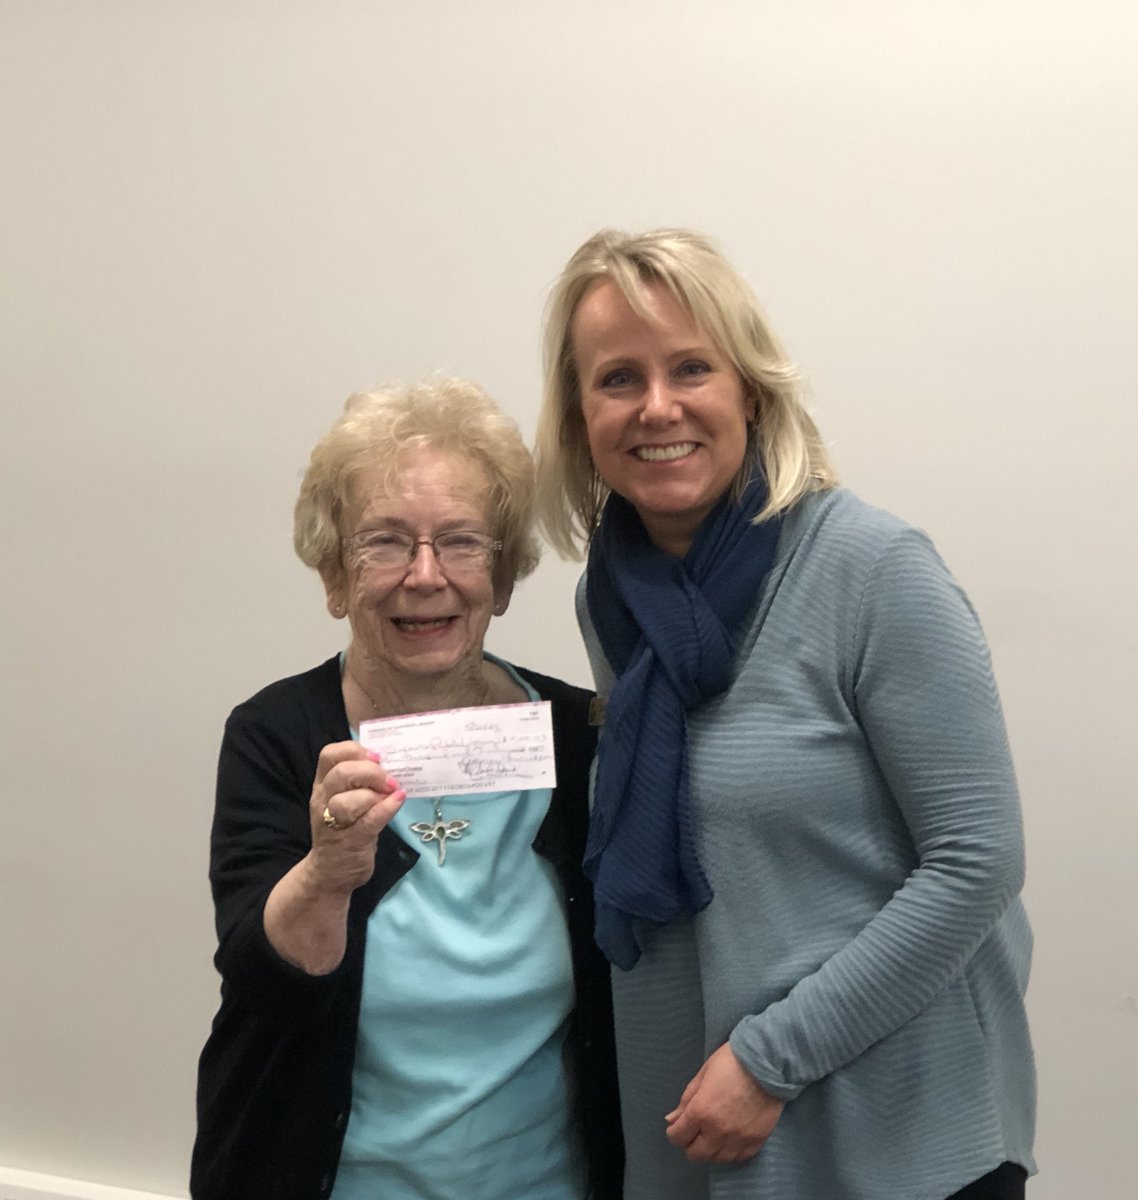 Congrats to Volunteer of the Year Lori Flynn! And THANK YOU, Superior Friends of the Library, for your $15,000 donation! Your hard work + support is appreciated more than we can say. #SuperiorWI #WisconsinLibraries #LibraryFriends #PublicLibraries #LibraryLove #SupportLibraries